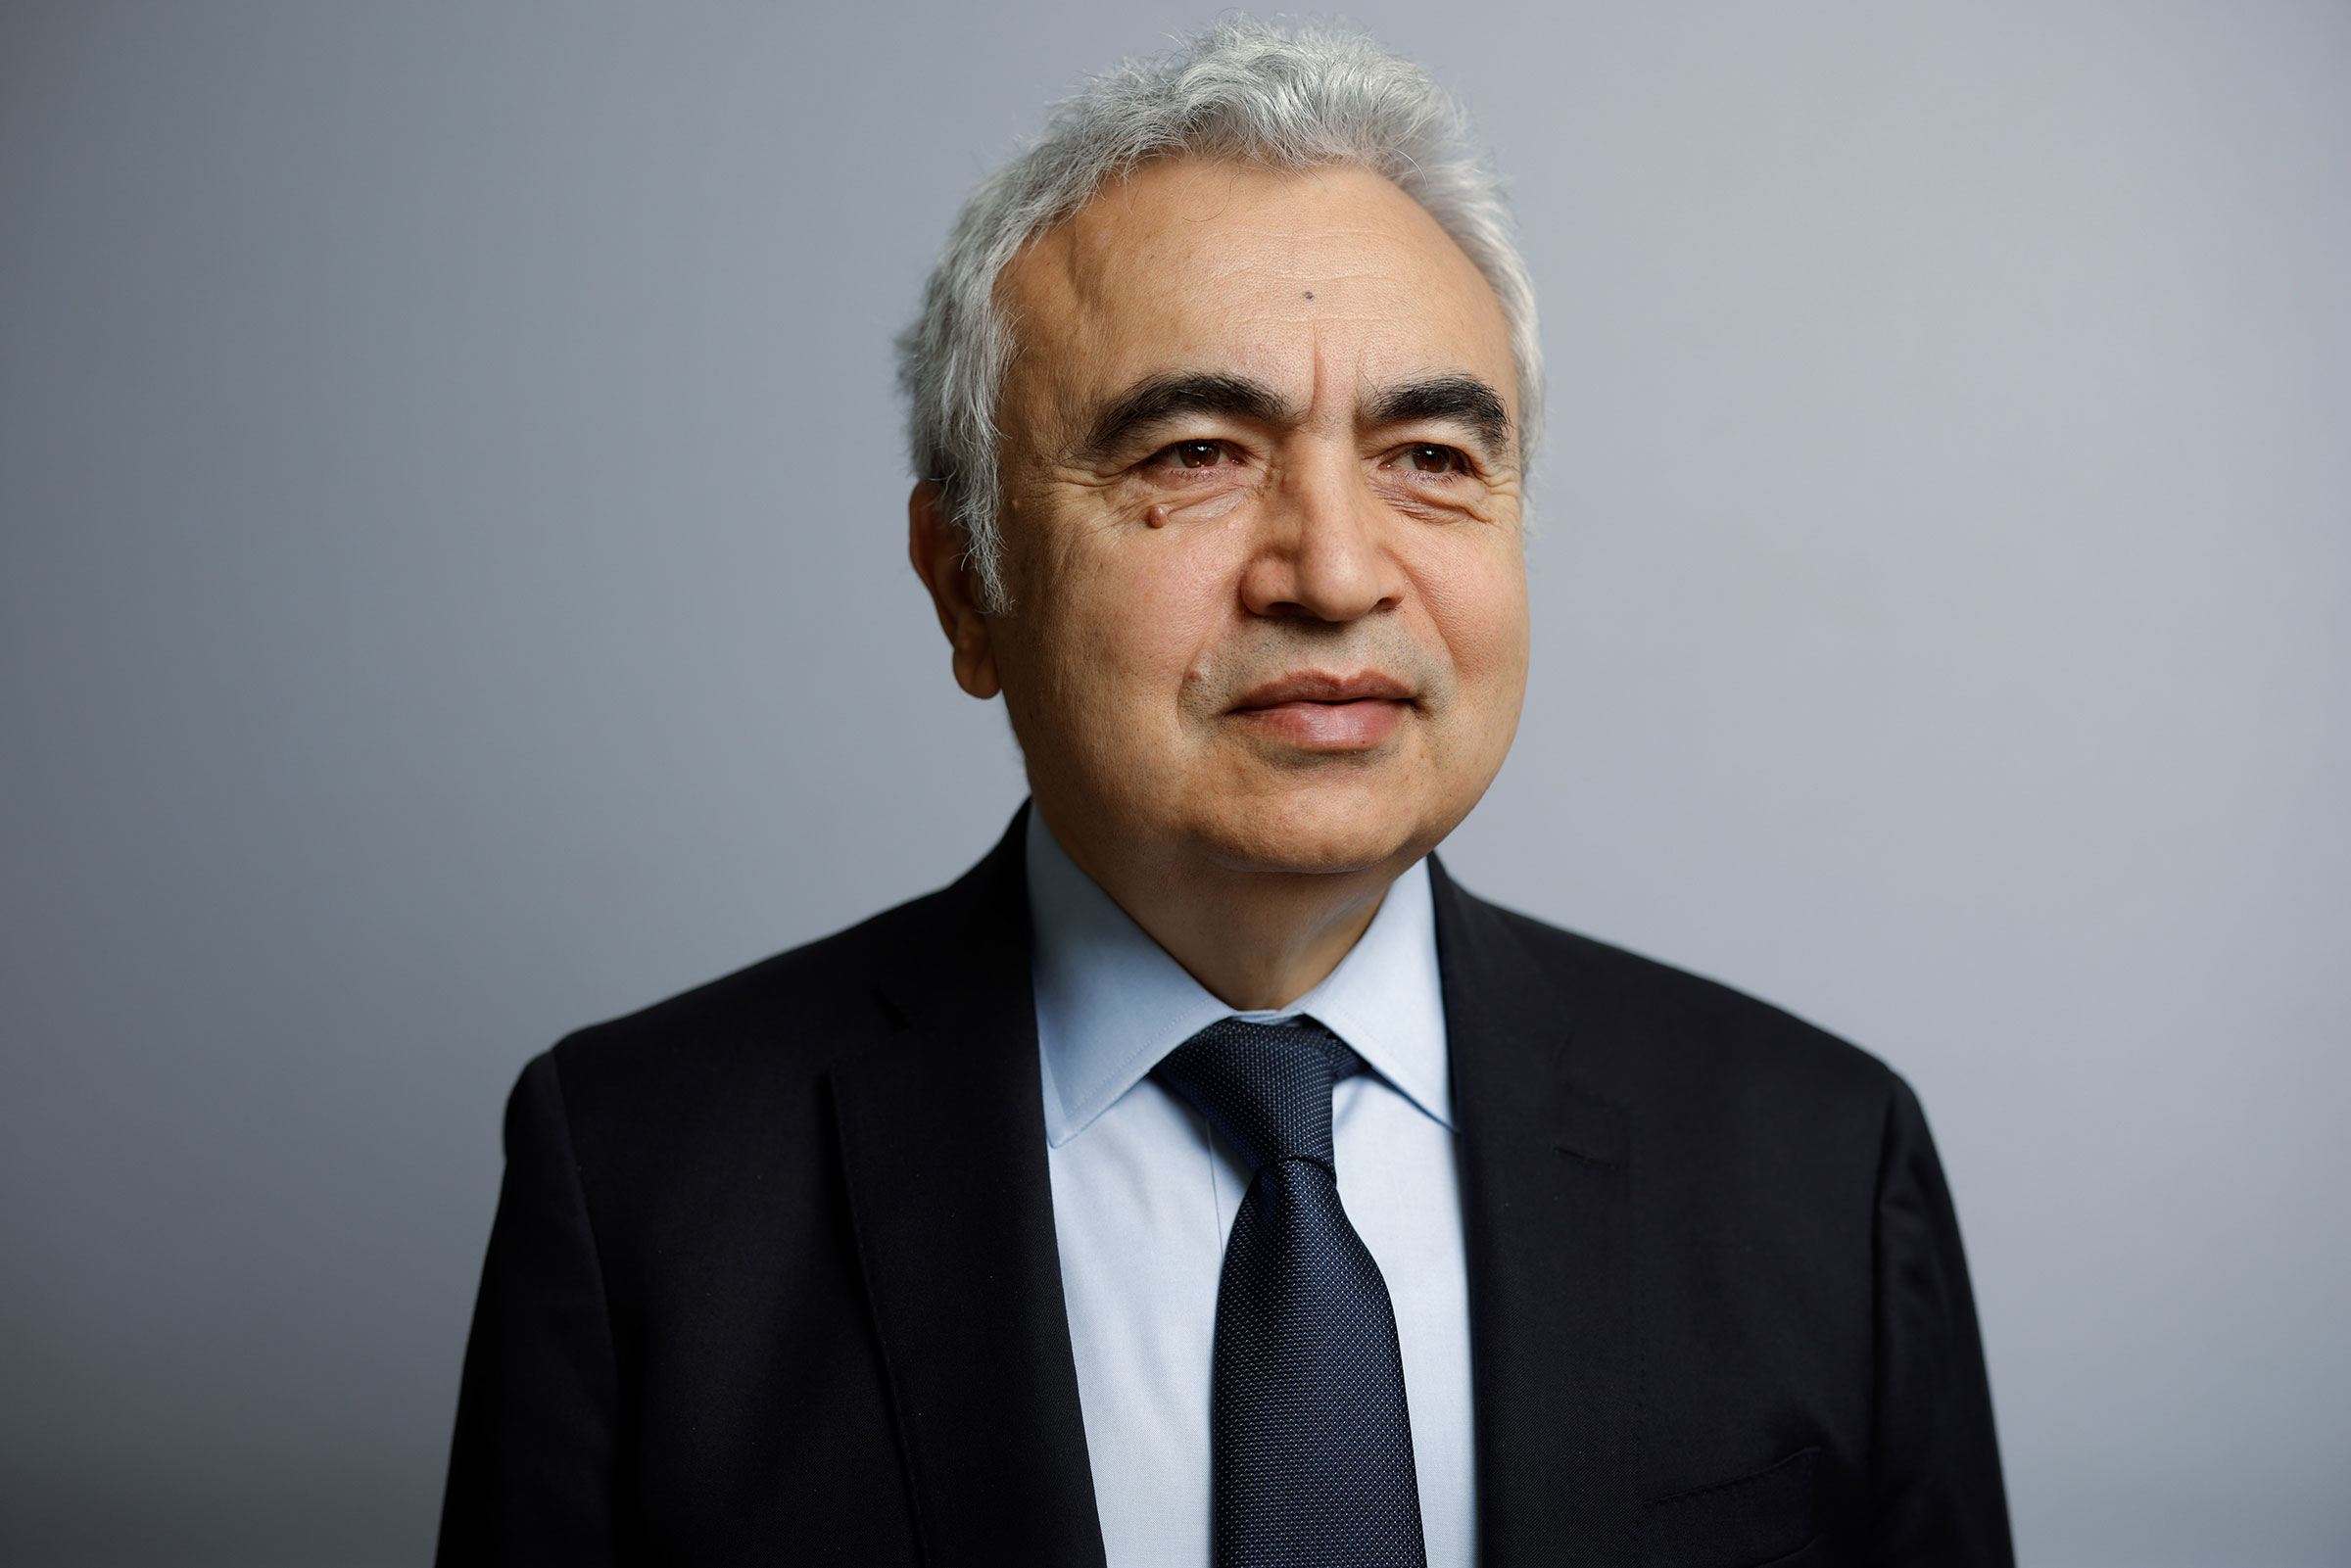 Fatih Birol, executive director of the International Energy Agency on the opening day of the World Economic Forum in Davos, Switzerland, on May 23, 2022. (Jason Alden—Bloomberg/Getty Images)